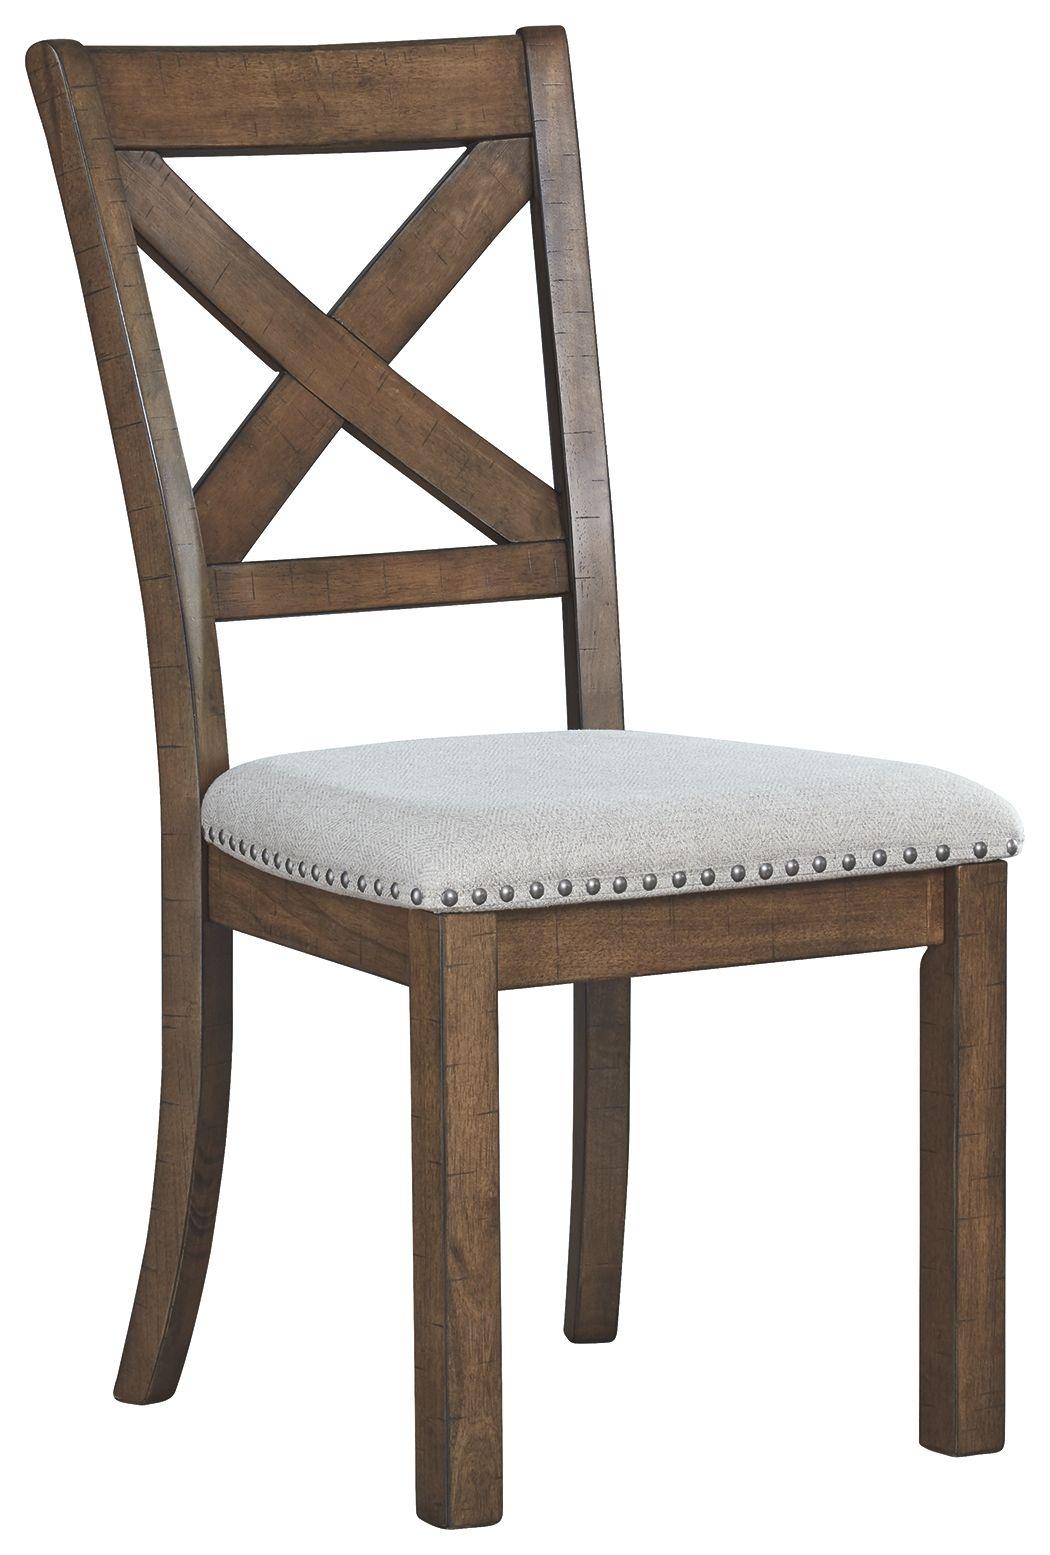 Ashley Furniture - Moriville - Beige - Dining Uph Side Chair (Set of 2) - 5th Avenue Furniture